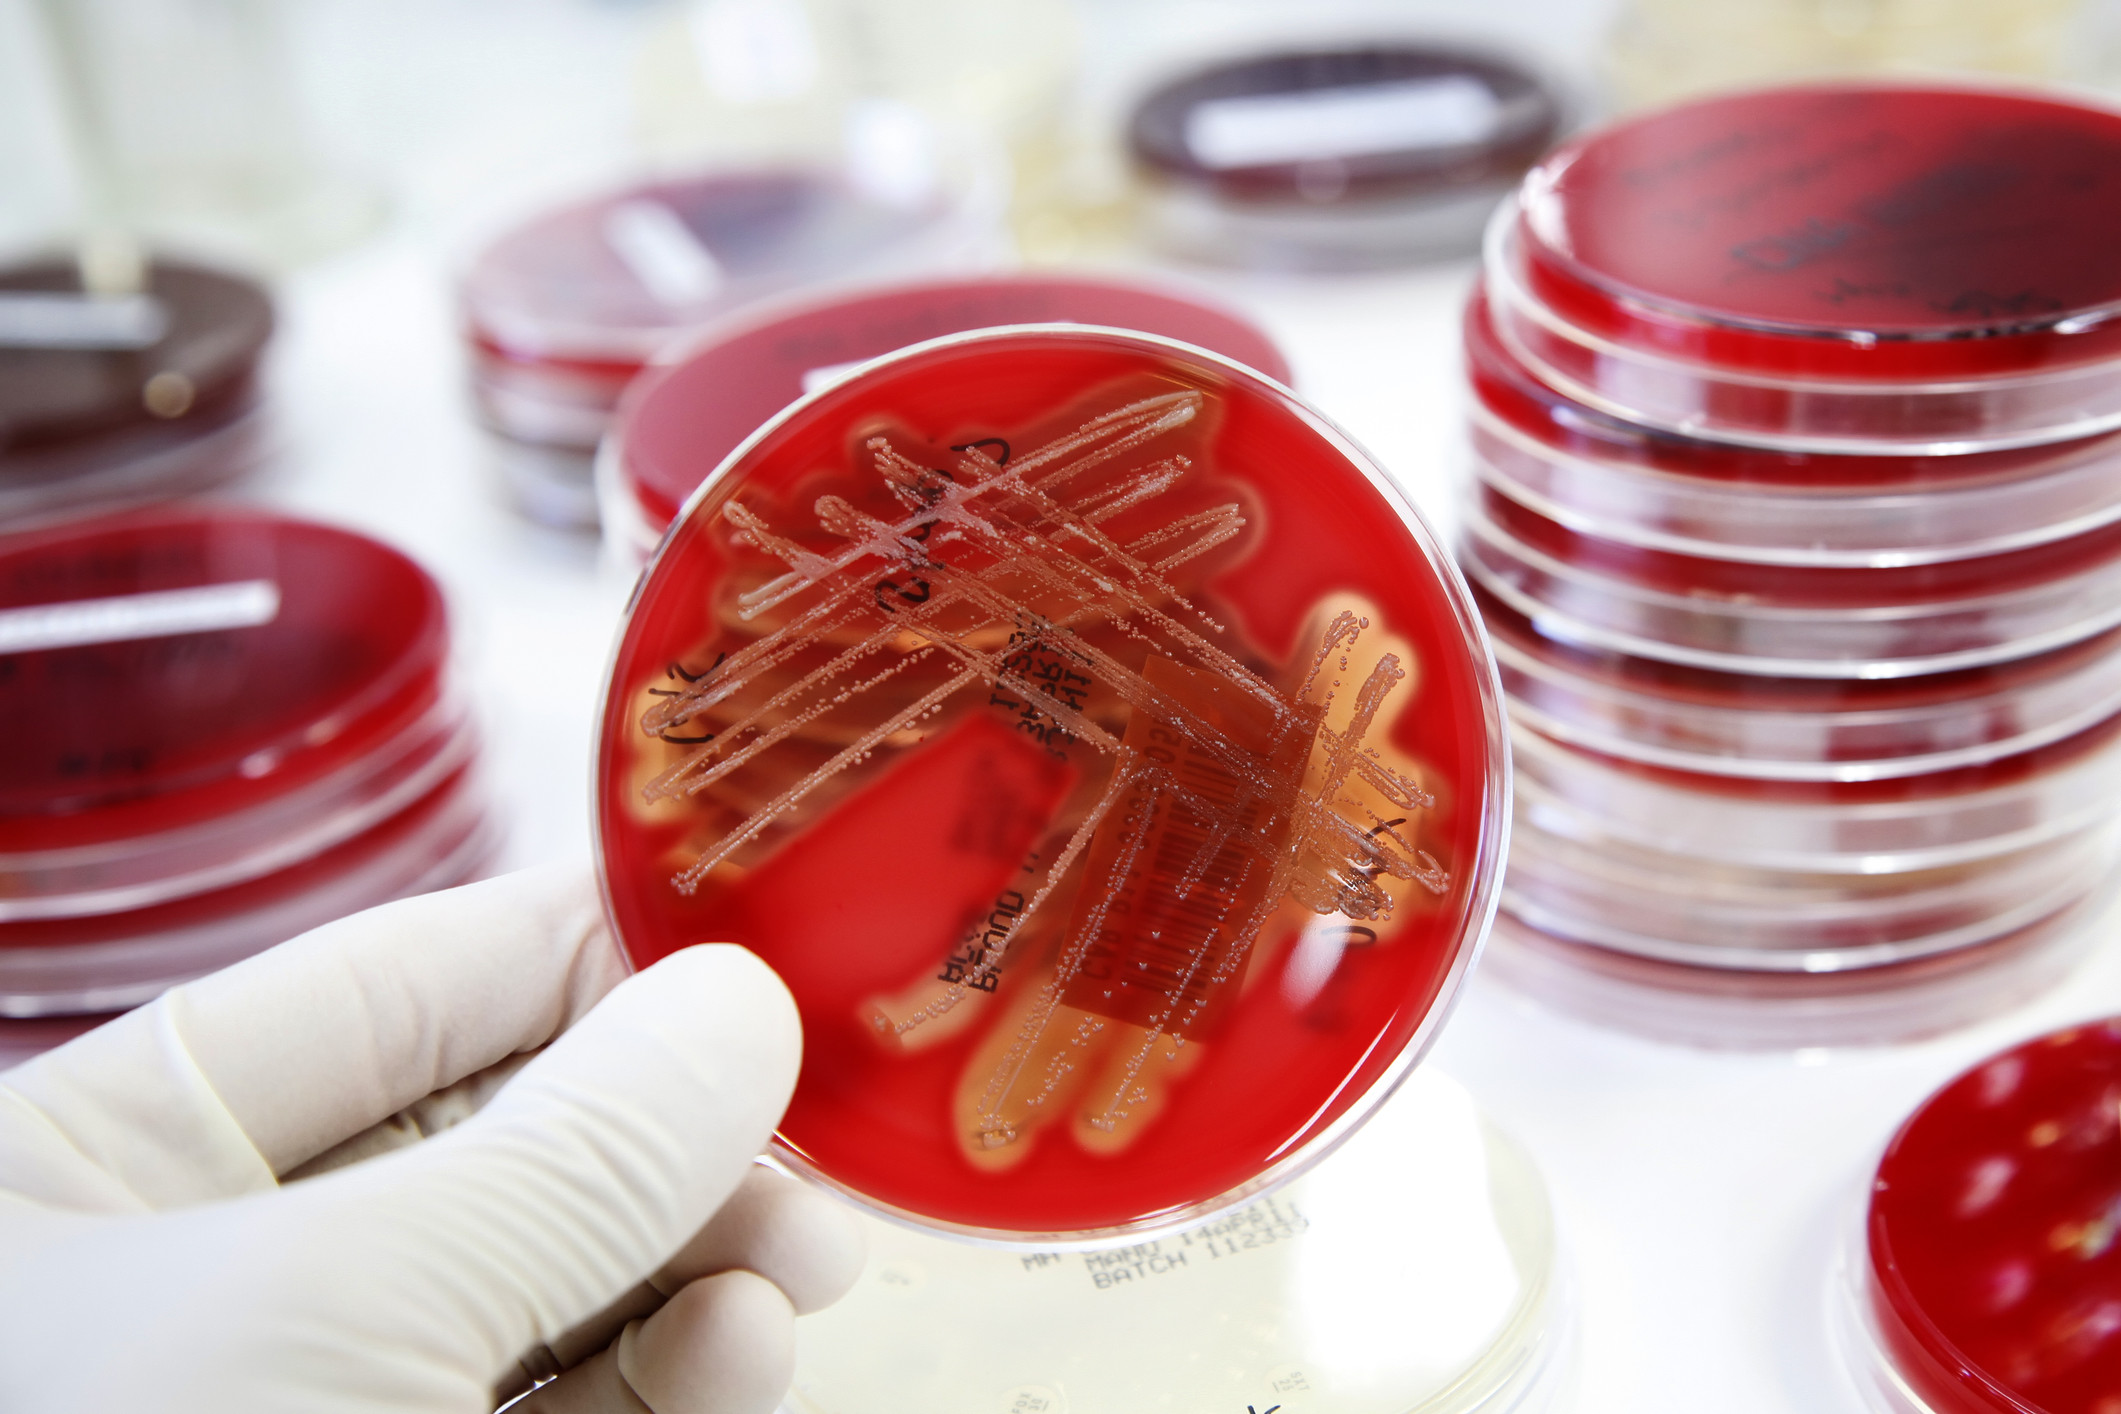 Russia to work on antimicrobial resistance. Photo: Shutterstock